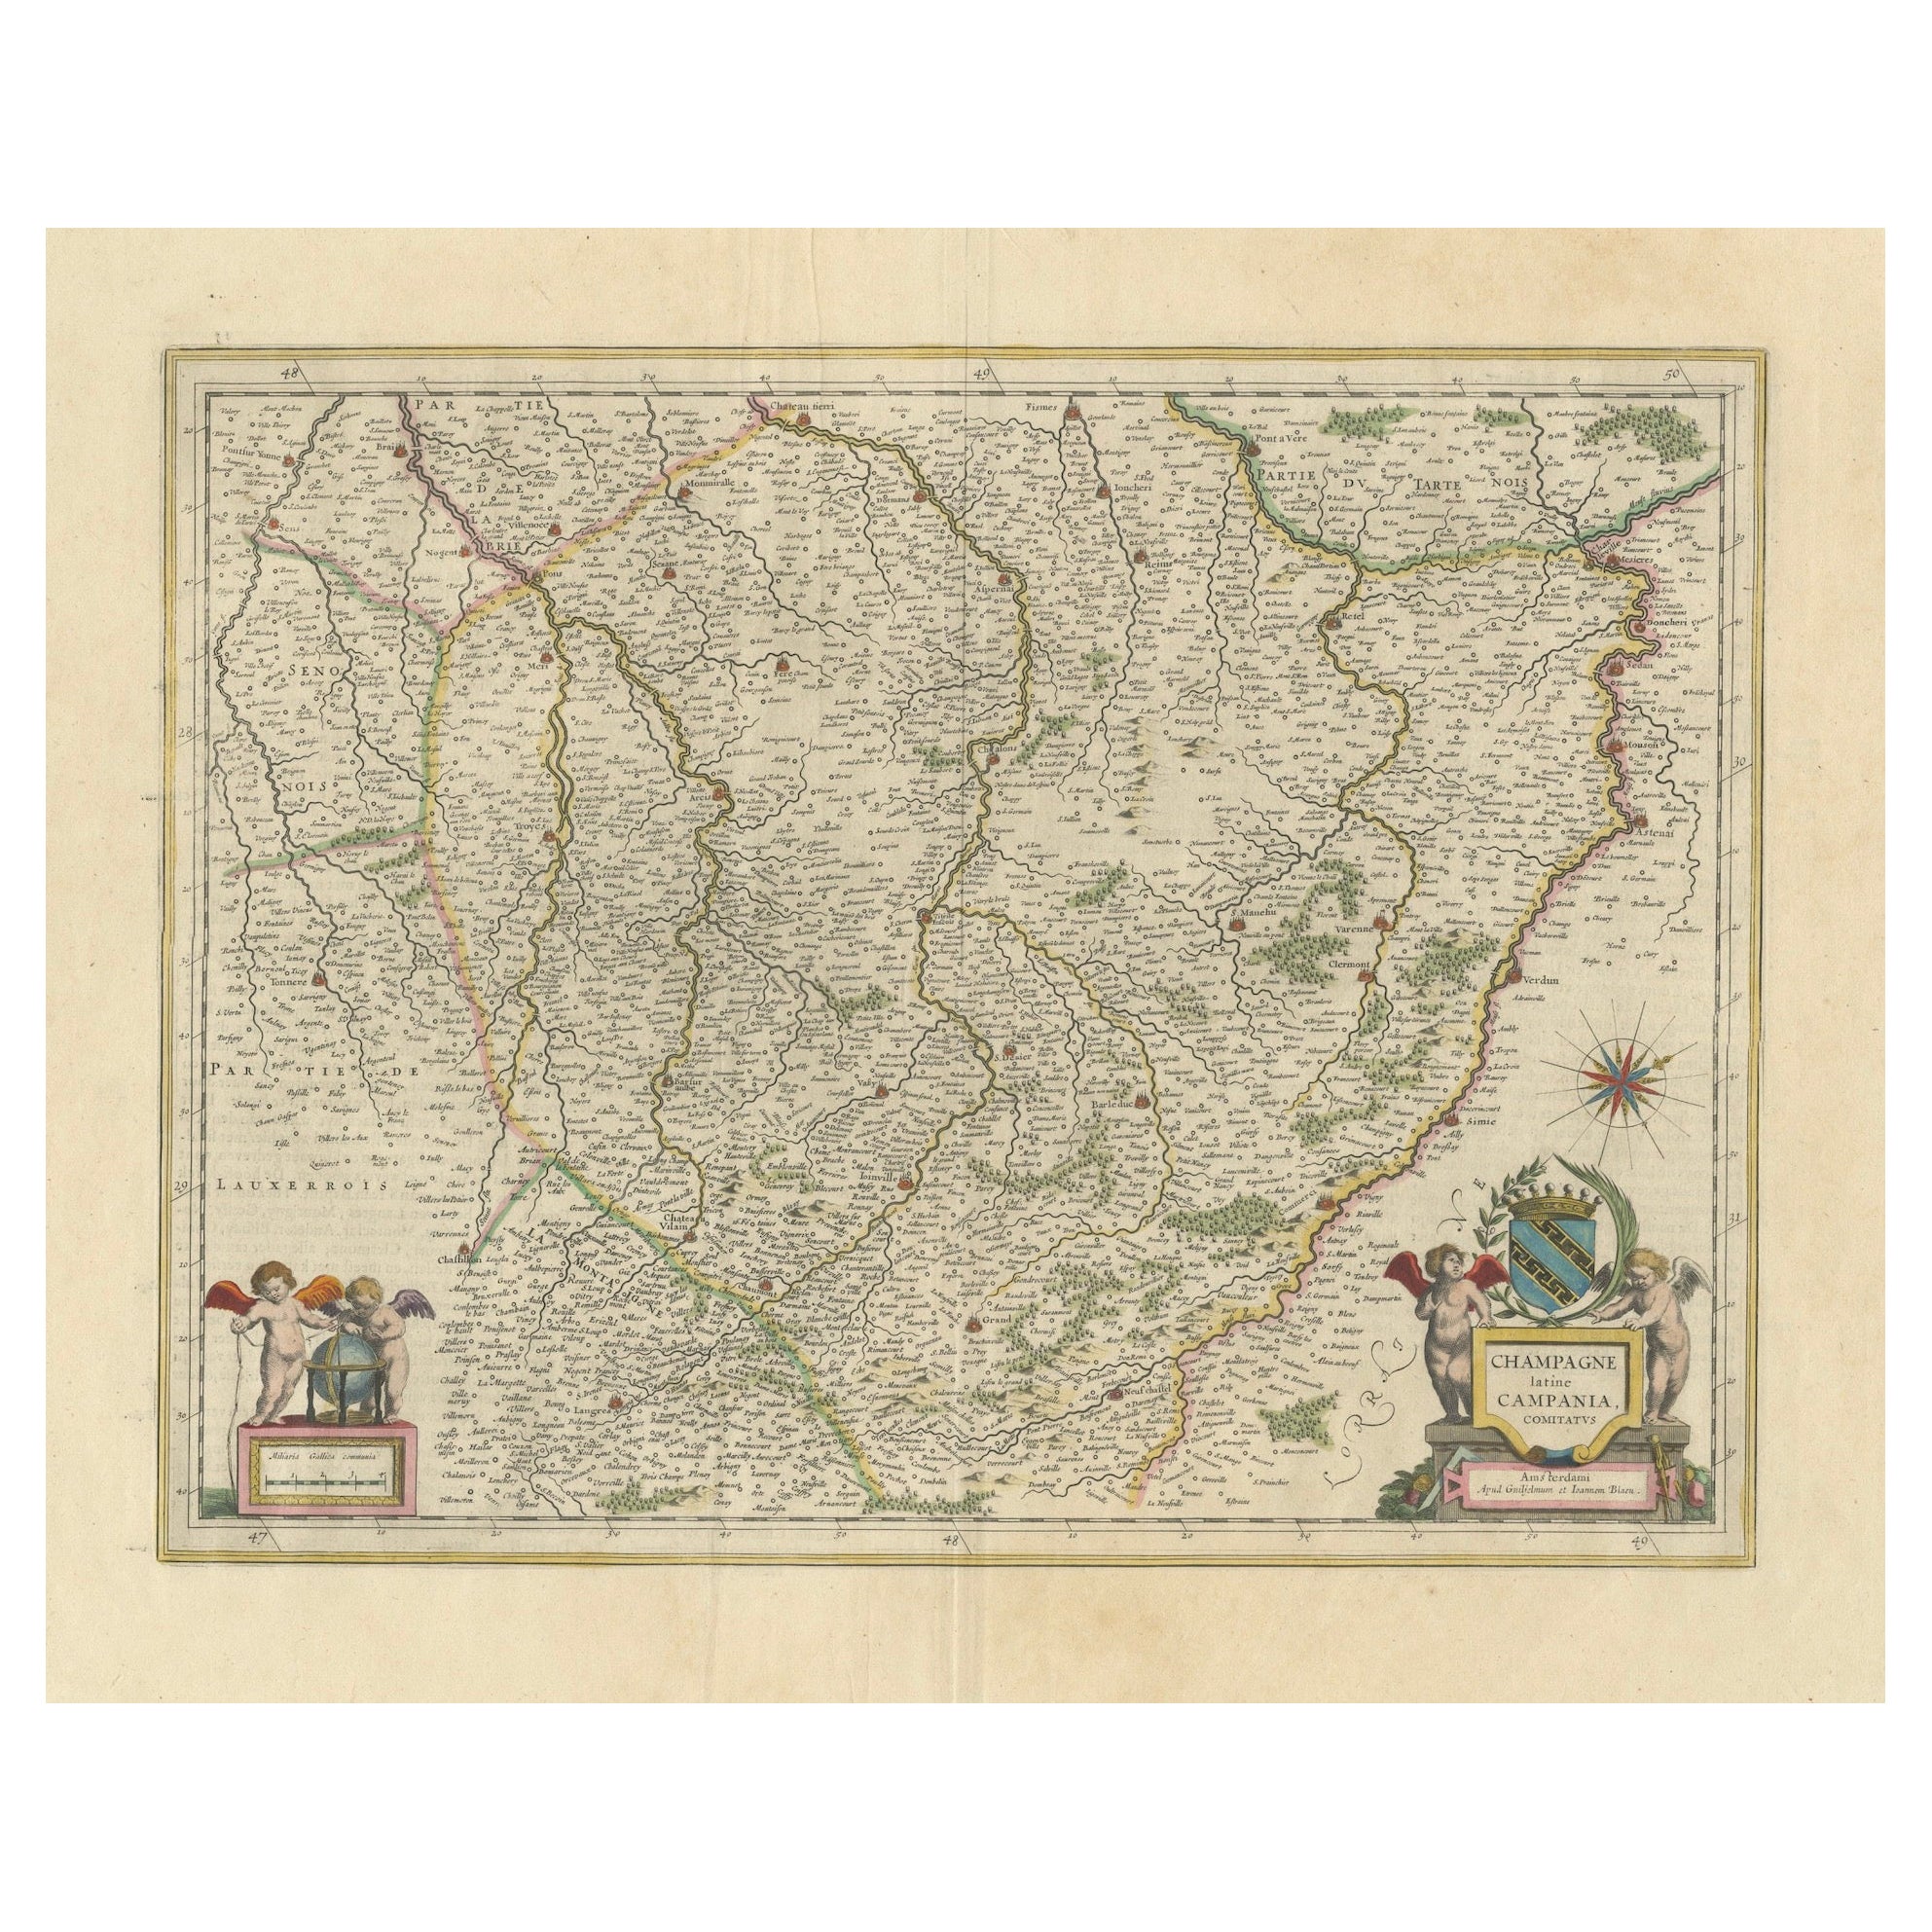 Authentic 1644 Janssonius Map of the Champagne Region (Campania) in France For Sale